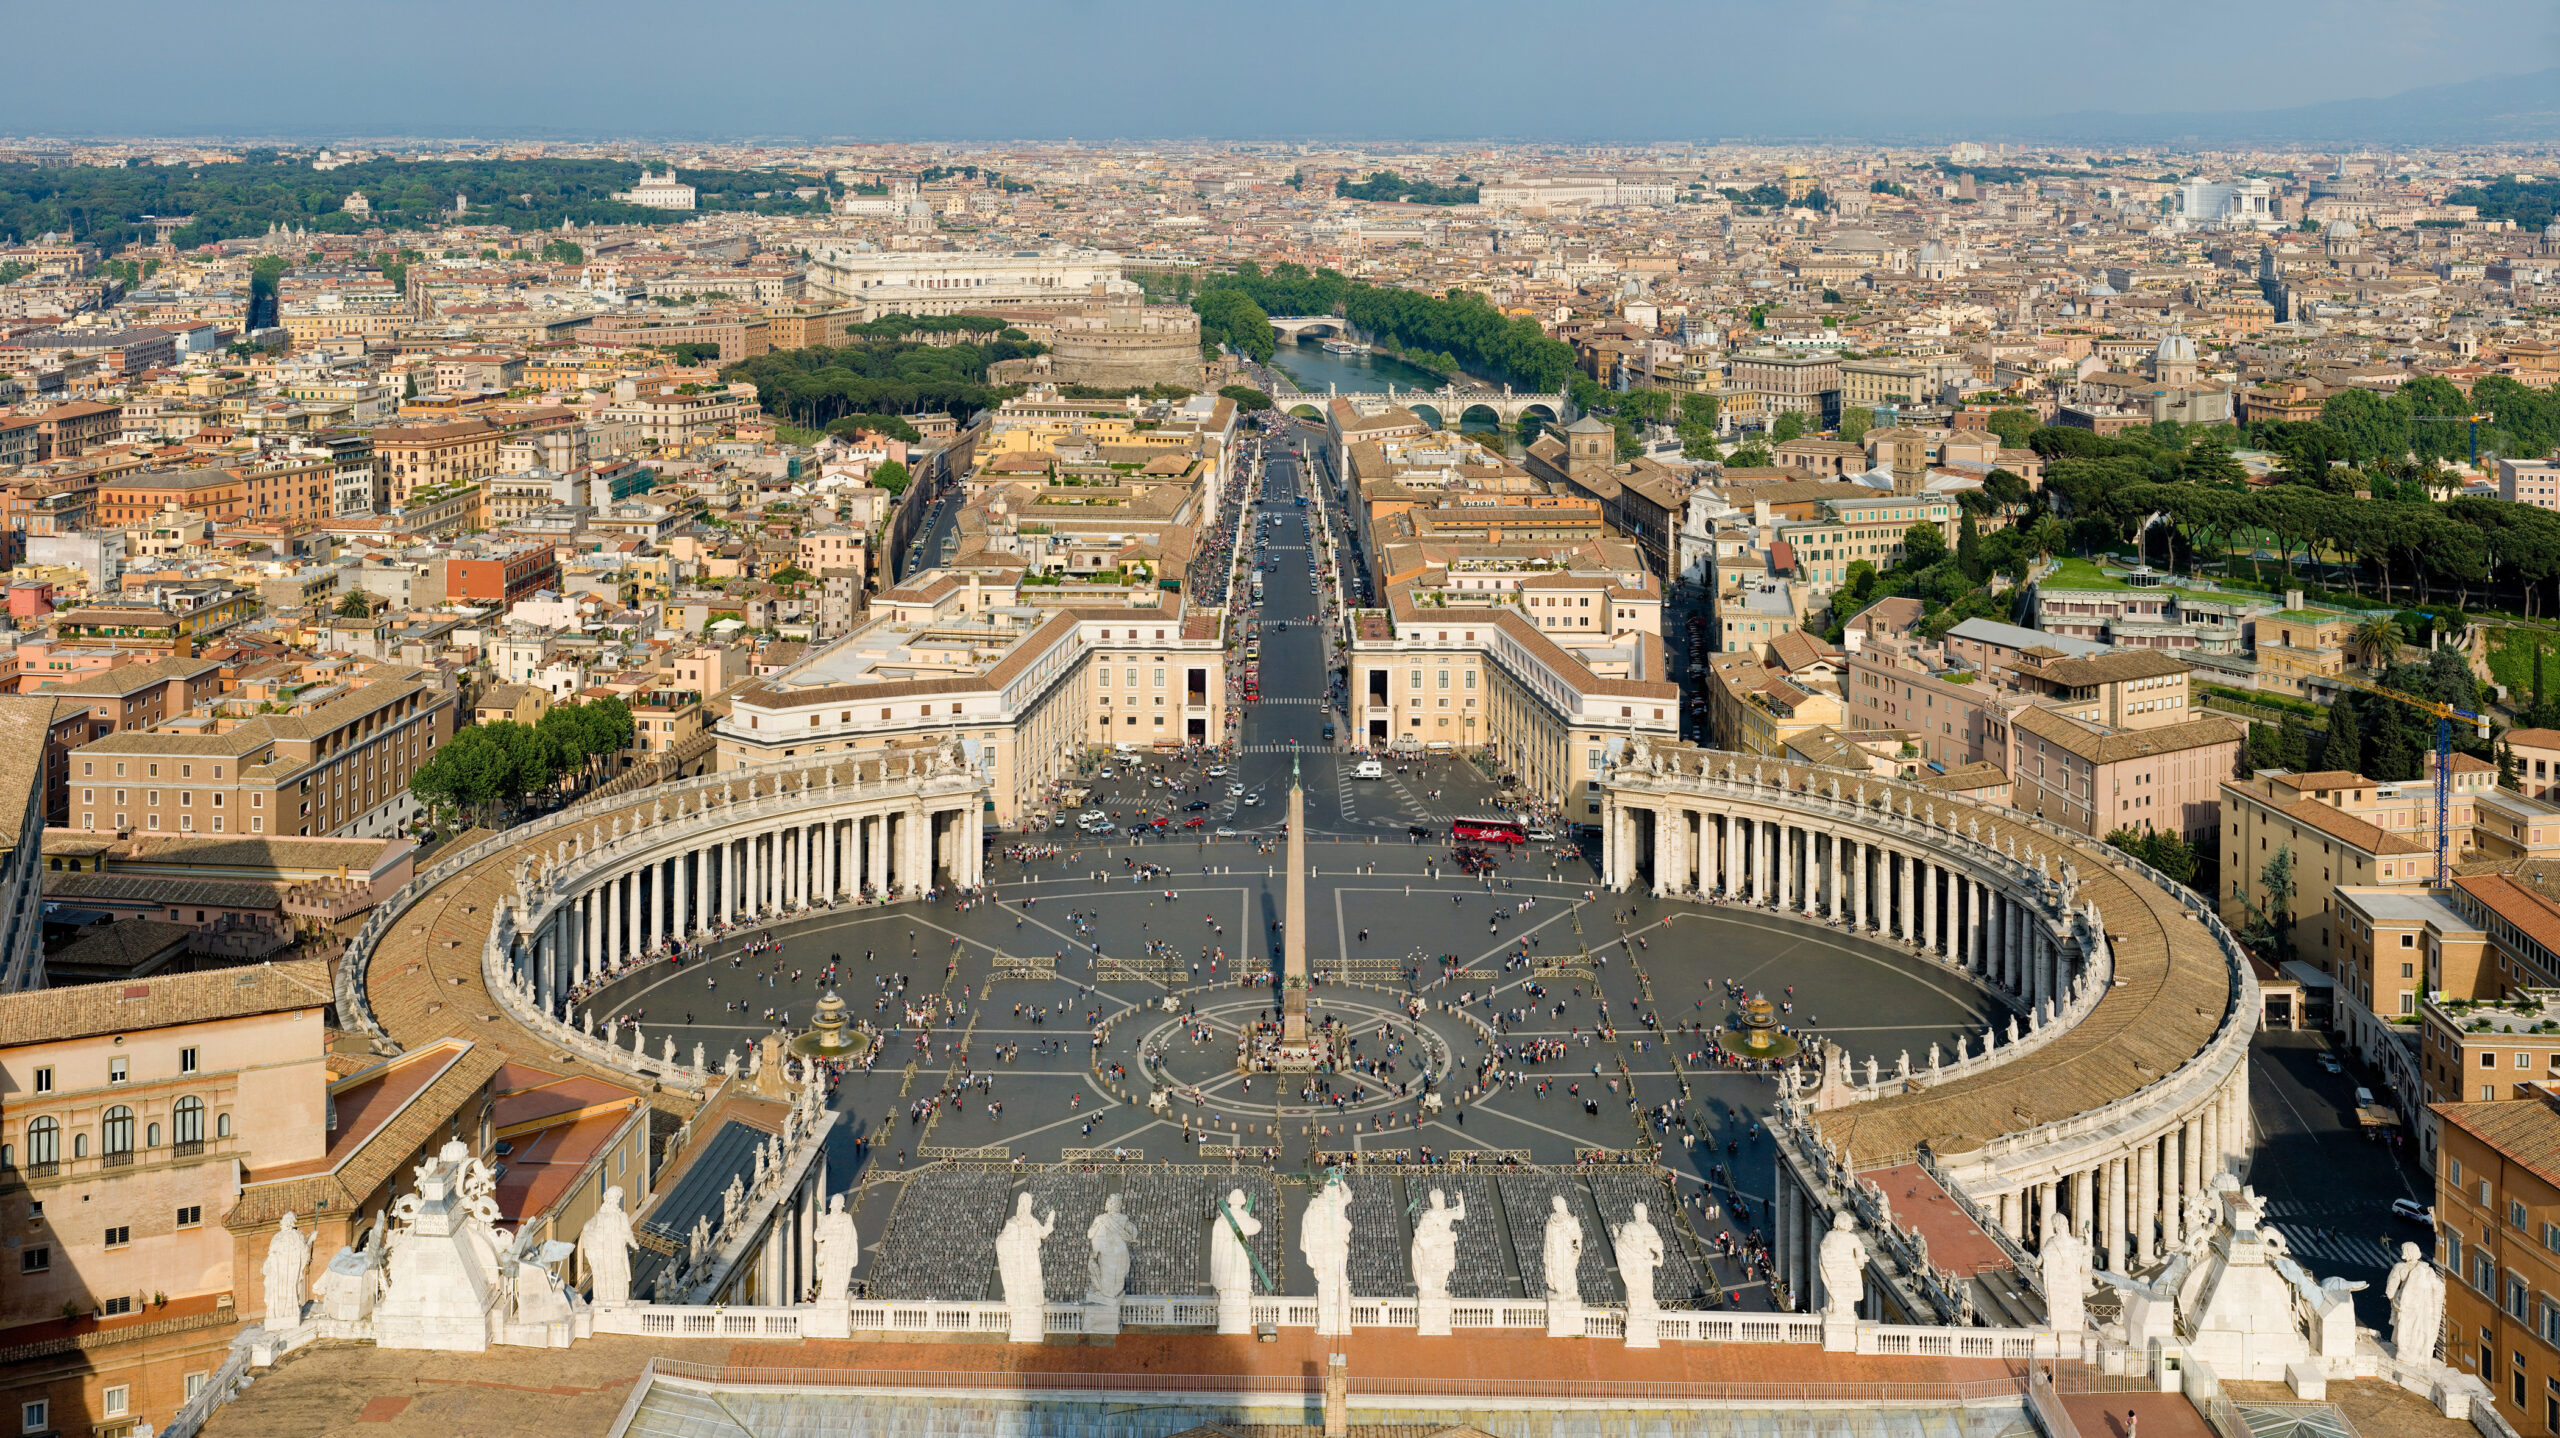 Vatican City in Rome, Italy is seen from above looking down upon St. Peter's Square on a sunny day.